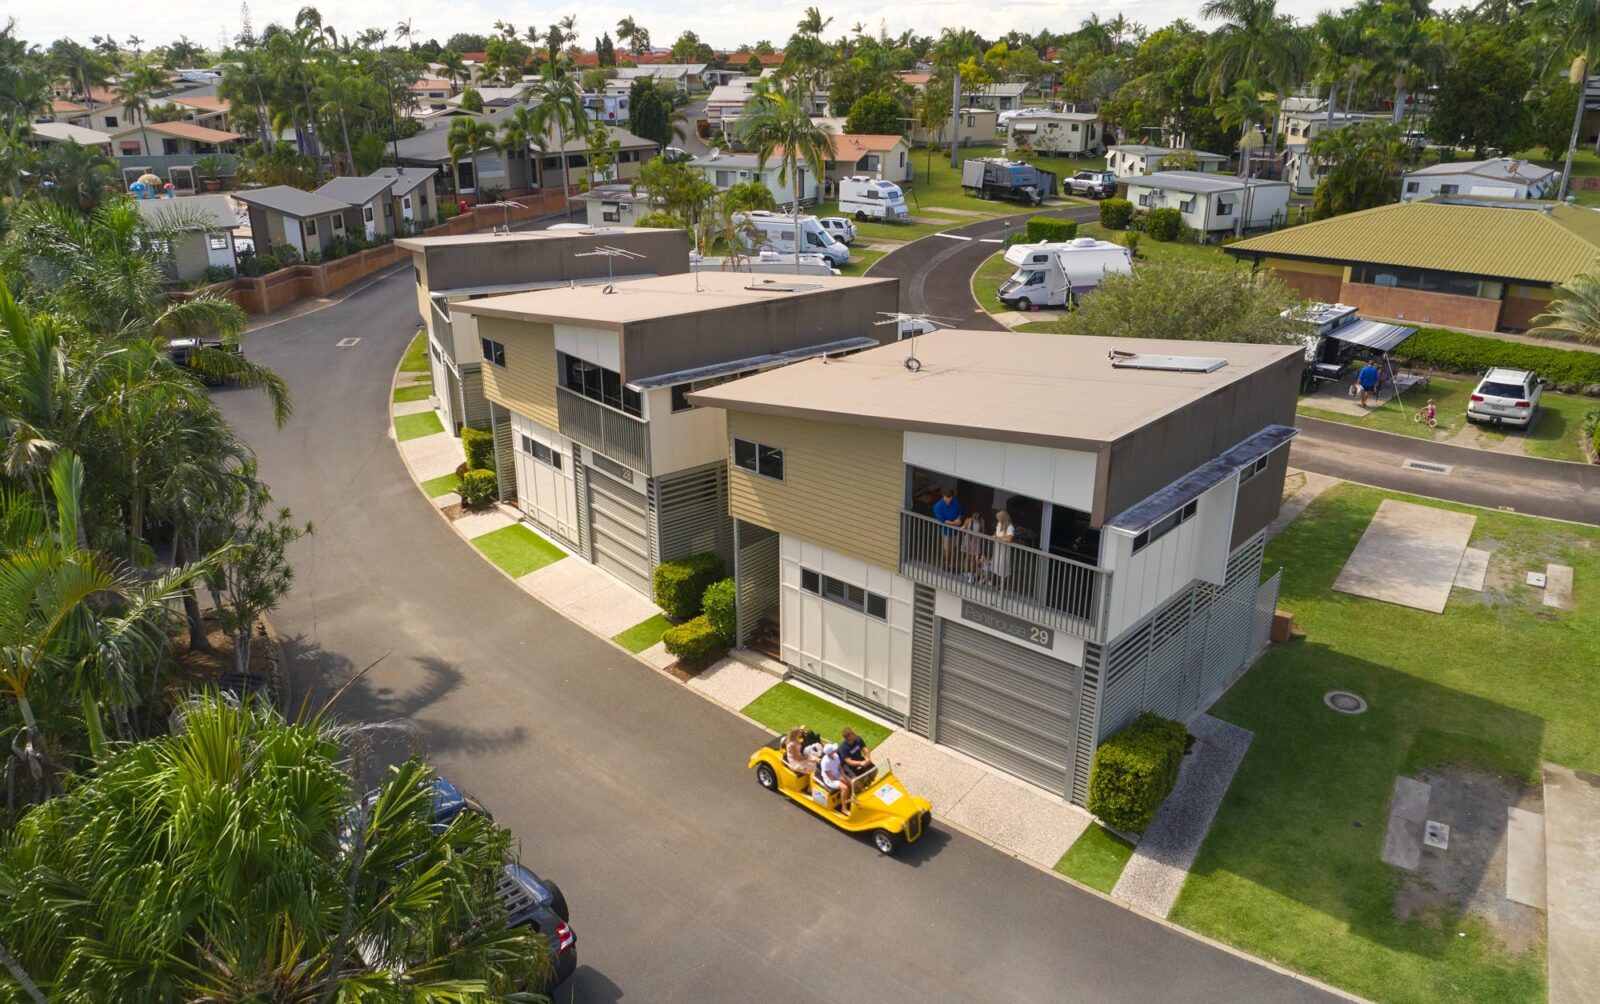 Penthouse Cabins at Brisbane Holiday Village